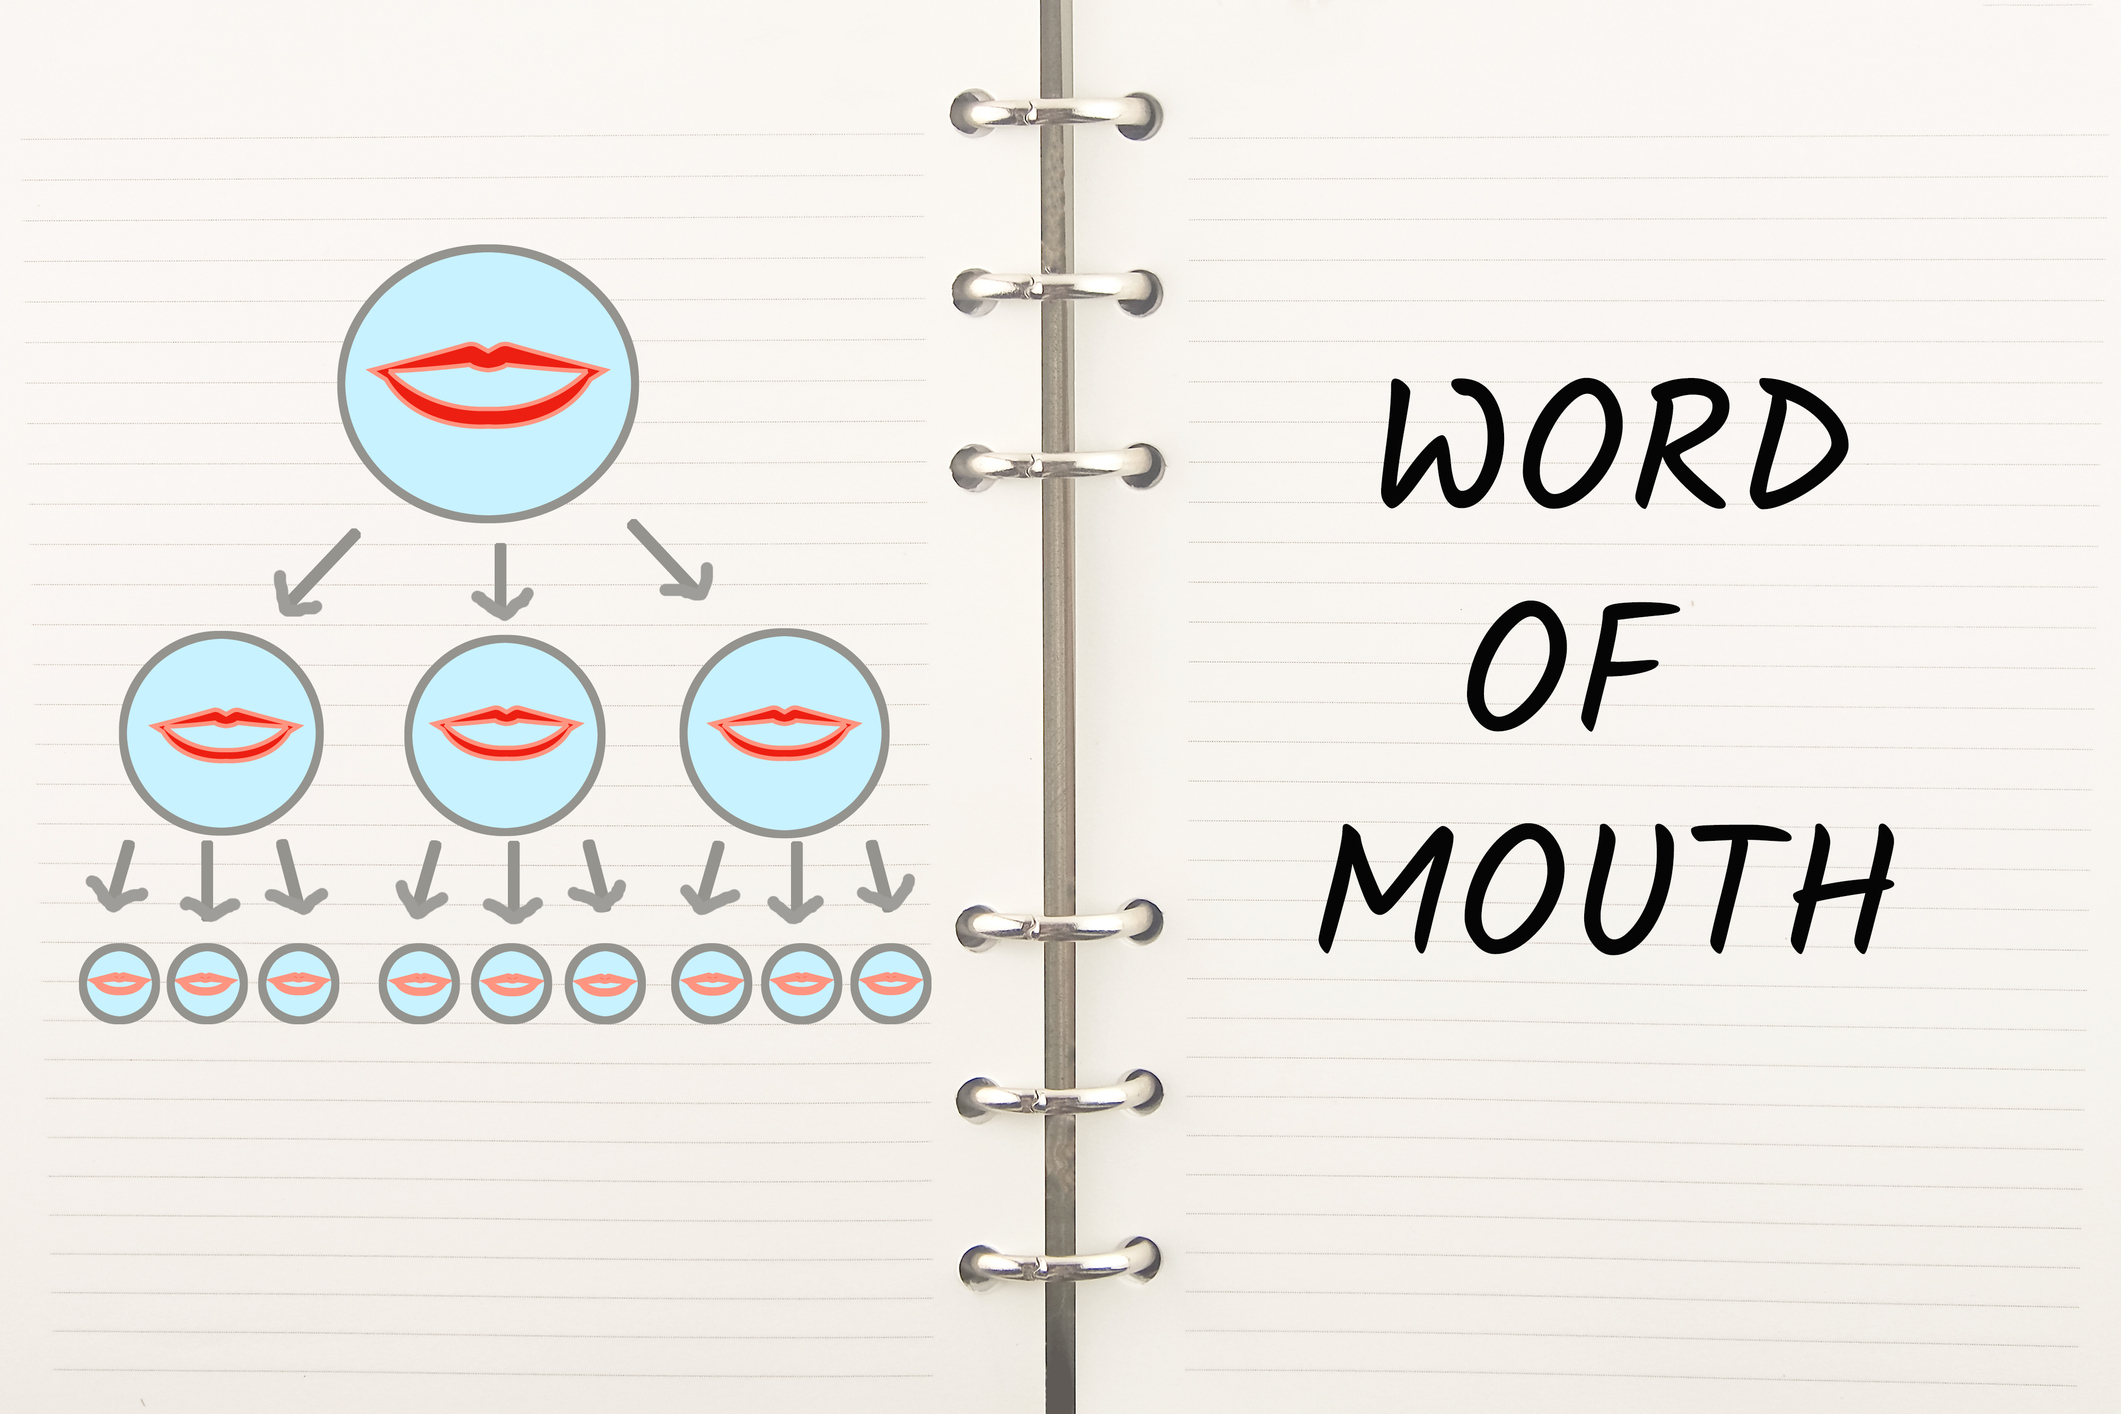 An org chart flowing downwards with pictures of lips, showing how word of mouth can be an effective way to spread a message